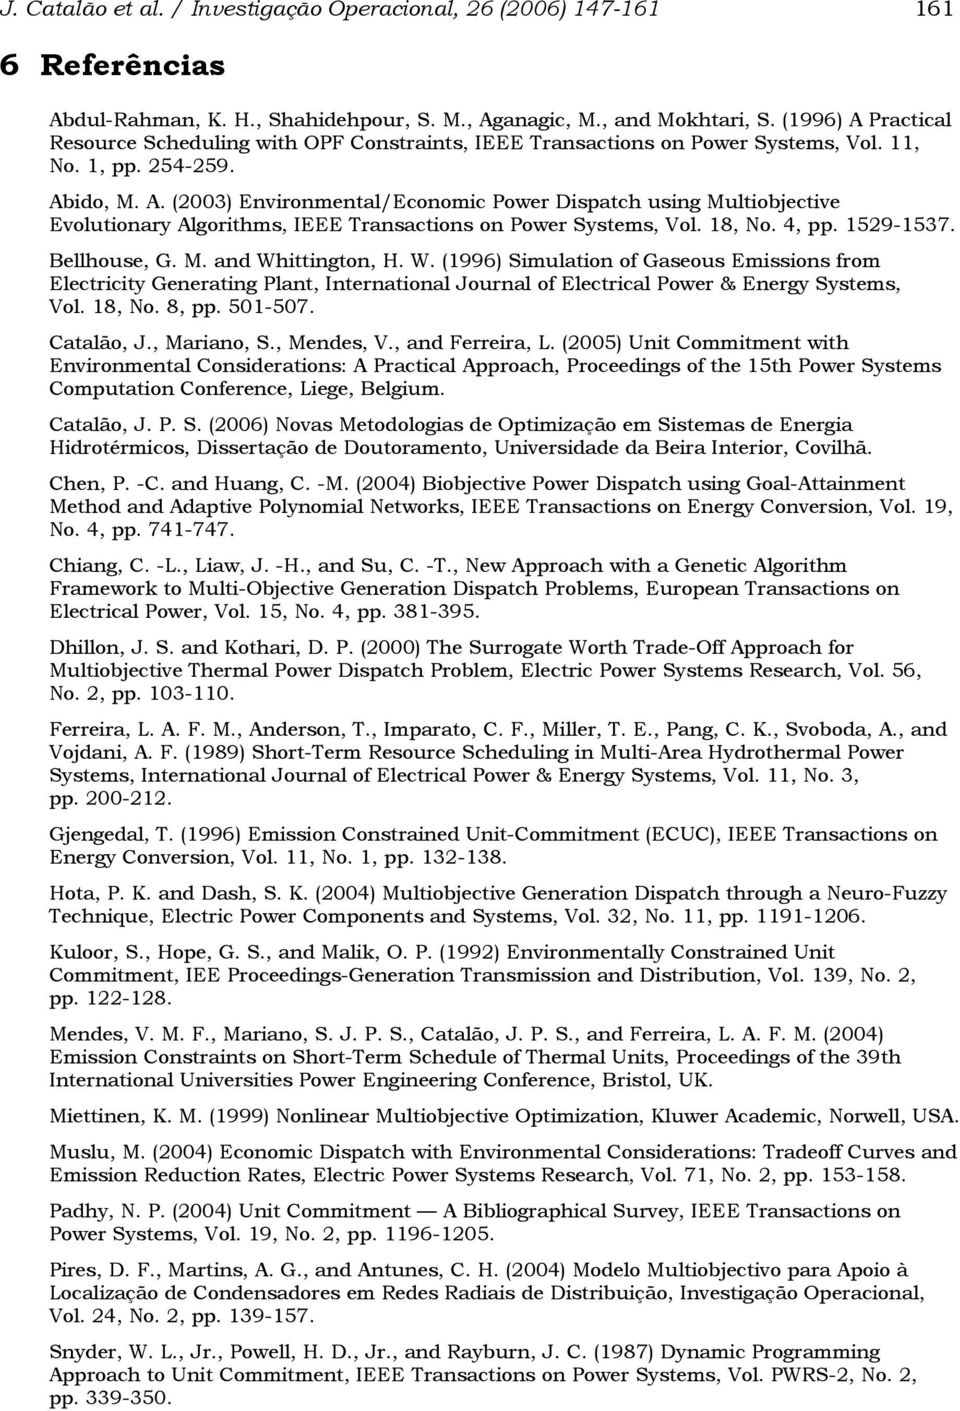 18, No. 4, pp. 1529-1537. Bellhouse, G. M. and Whttngton, H. W. (1996) Smulaton of Gaseous Emssons from Electrcty Generatng Plant, Internatonal Journal of Electrcal Power & Energy Systems, Vol.